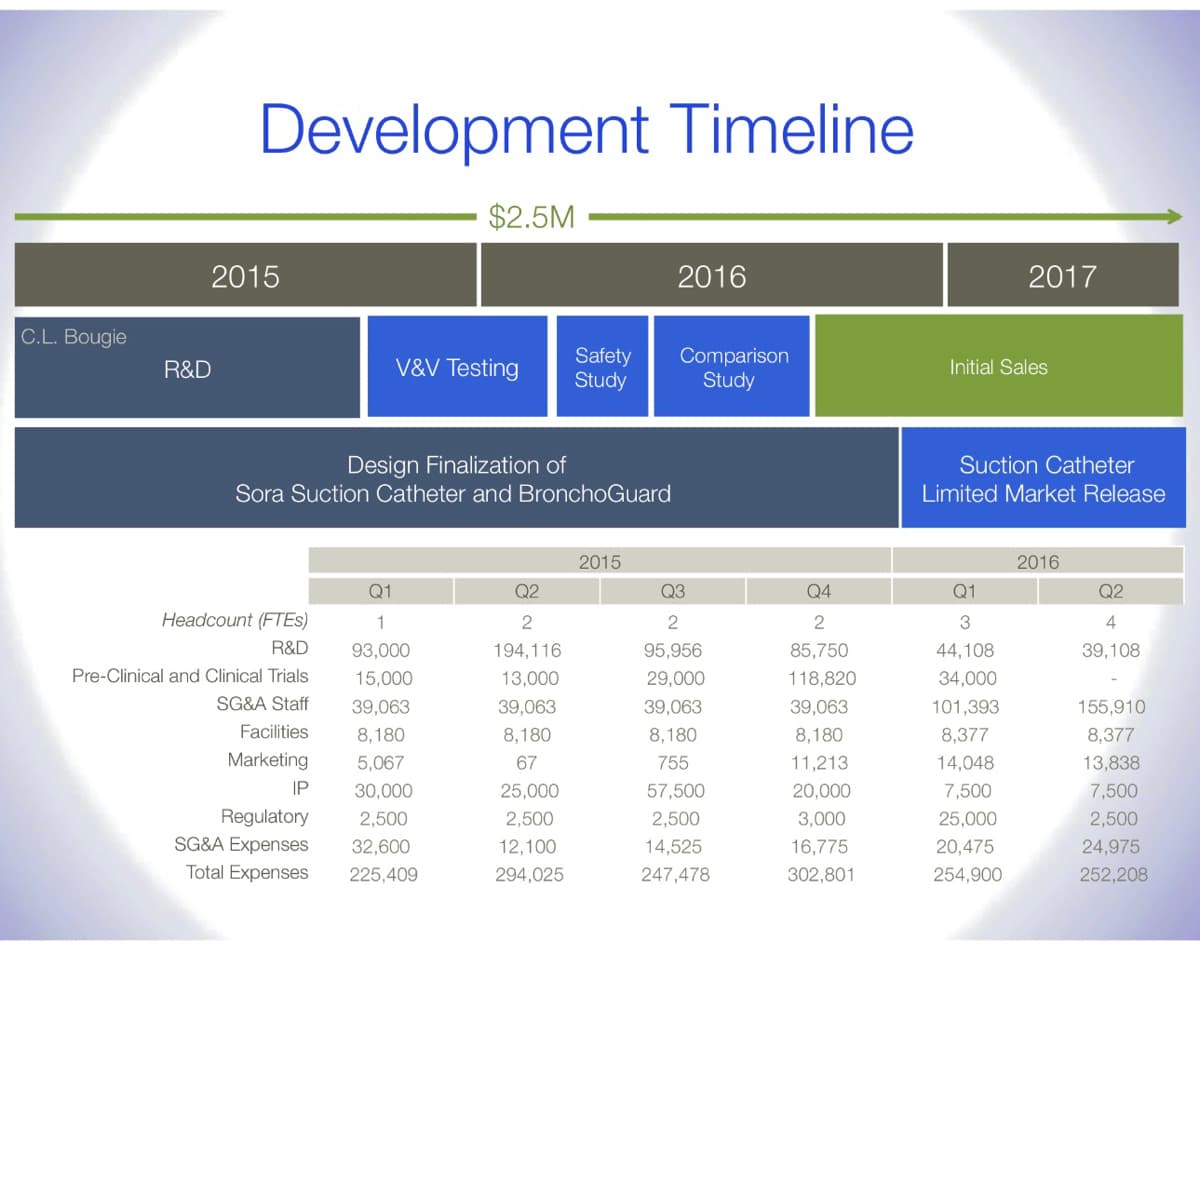 C.L. Bougie
Development Timeline
2015
R&D
Q1
1
93,000
15,000
39,063
8,180
5,067
30,000
Regulatory 2,500
SG&A Expenses 32,600
Total Expenses
225,409
Headcount (FTES)
R&D
Pre-Clinical and Clinical Trials
SG&A Staff
$2.5M
V&V Testing
Design Finalization of
Sora Suction Catheter and BronchoGuard
Facilities
Marketing
IP
Safety
Study
Q2
2
194,116
13,000
39,063
8,180
67
25,000
2,500
12,100
294,025
2015
2016
Comparison
Study
Q3
2
95,956
29,000
39,063
8,180
755
57,500
2,500
14,525
247,478
Q4
2
85,750
118,820
39,063
8,180
11,213
20,000
3,000
16,775
302
2017
Initial Sales
Suction Catheter
Limited Market Release
Q1
3
44,108
34,000
101,393
8,377
14,048
7,500
25,000
20,475
254,900
2016
Q2
4
39,108
155,910
8,377
13,838
7,500
2,500
24,975
252,20